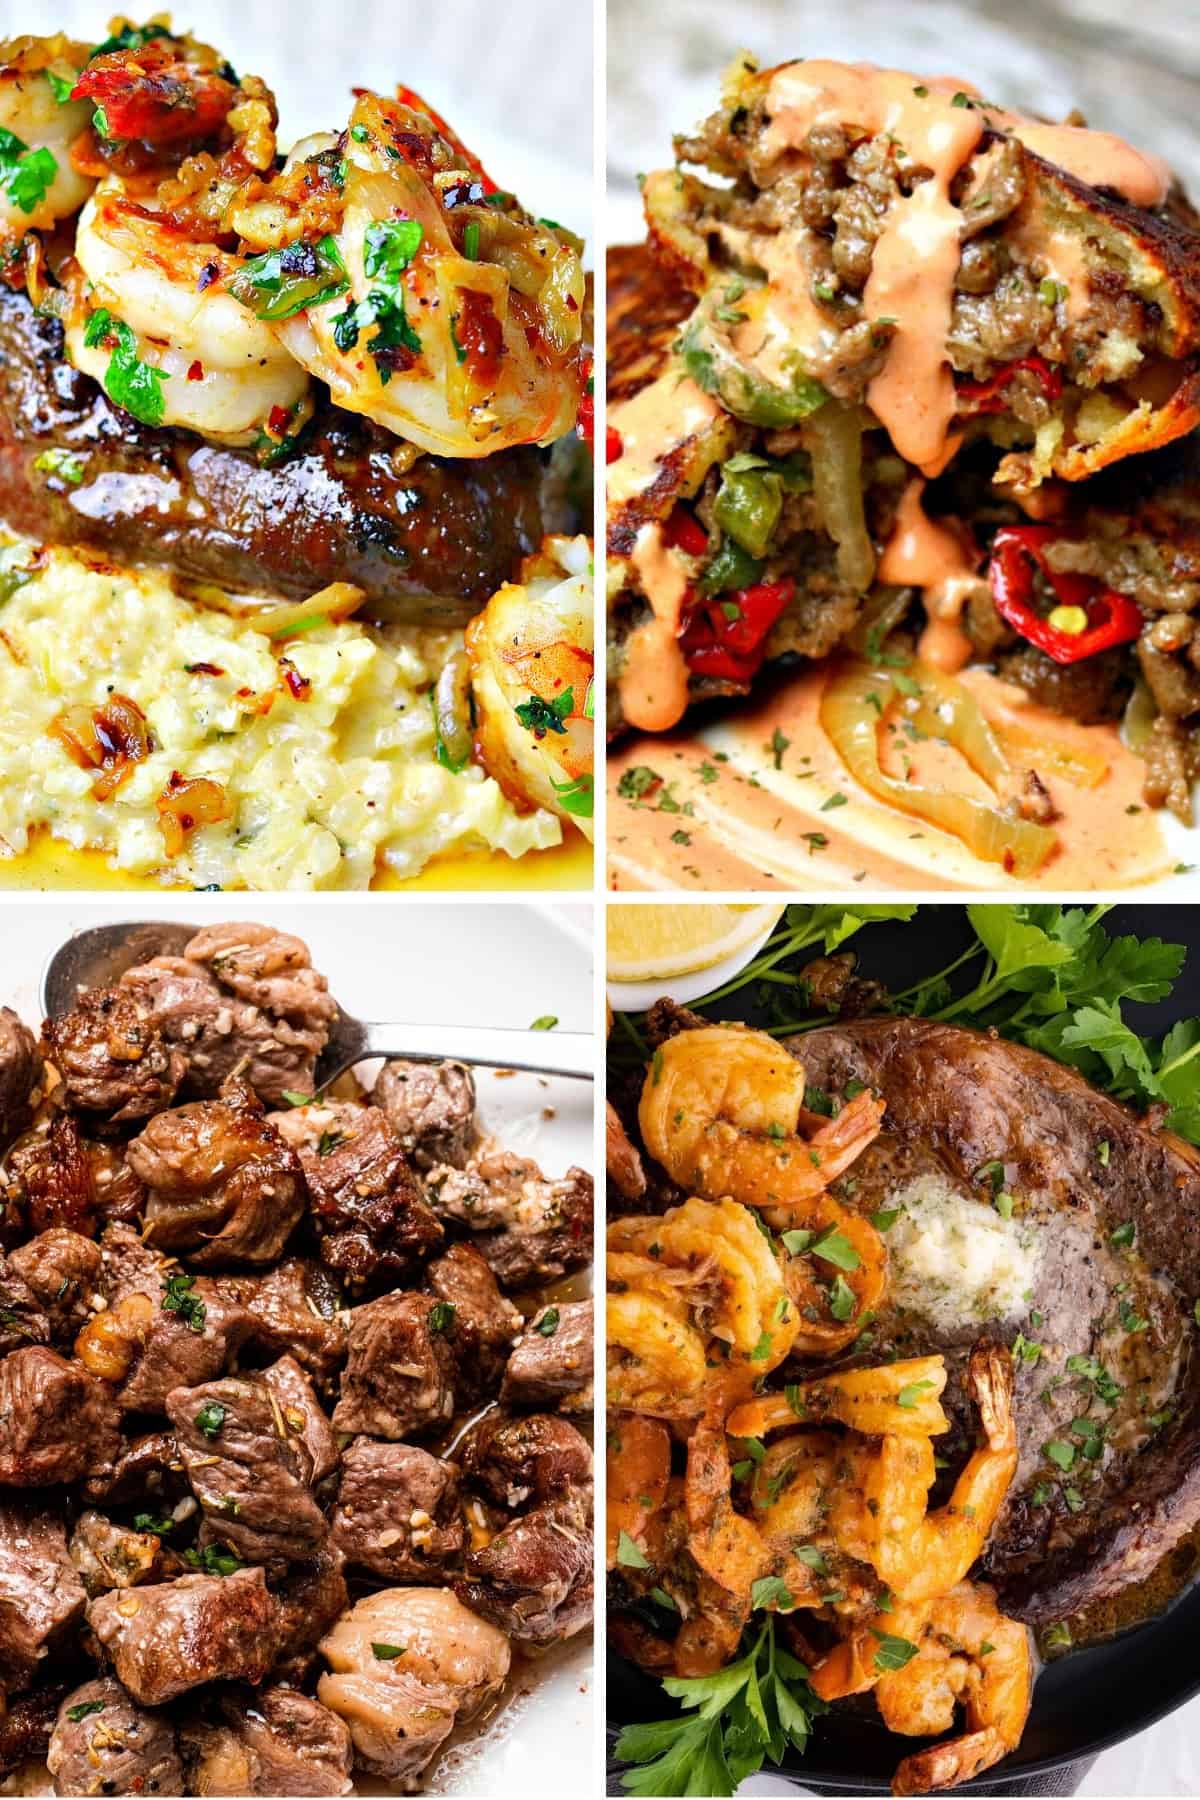 keto steak dinners like surf and turf, keto cheesesteak pockets, garlic butter steak bites, and air fryer surf and turf